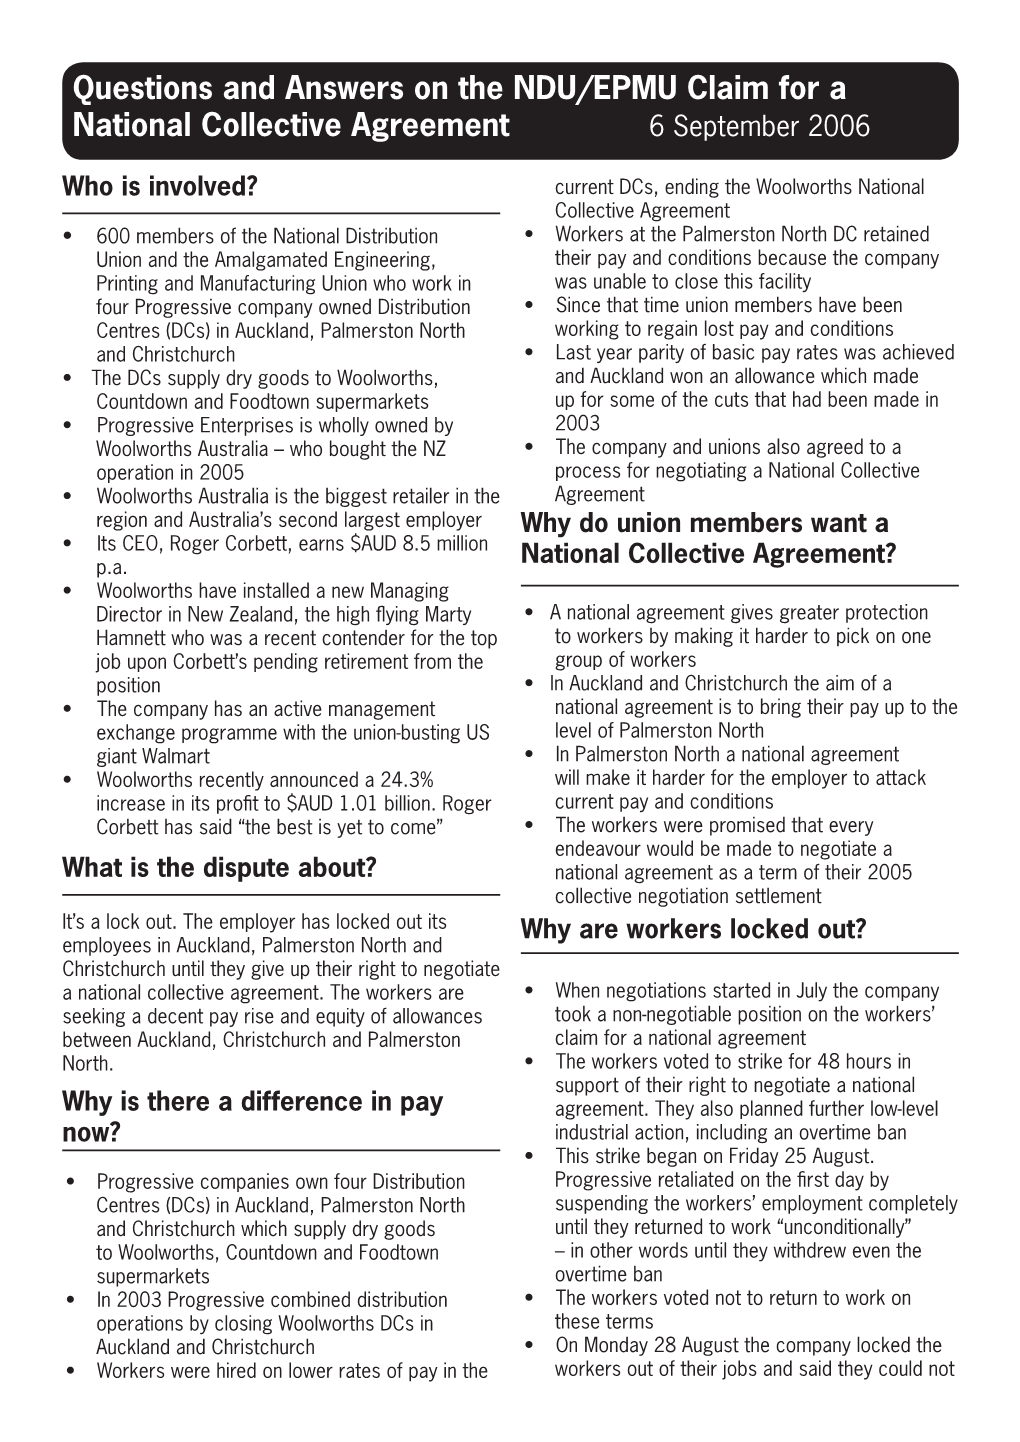 Questions and Answers on the NDU/EPMU Claim for a National Collective Agreement 6 September 2006